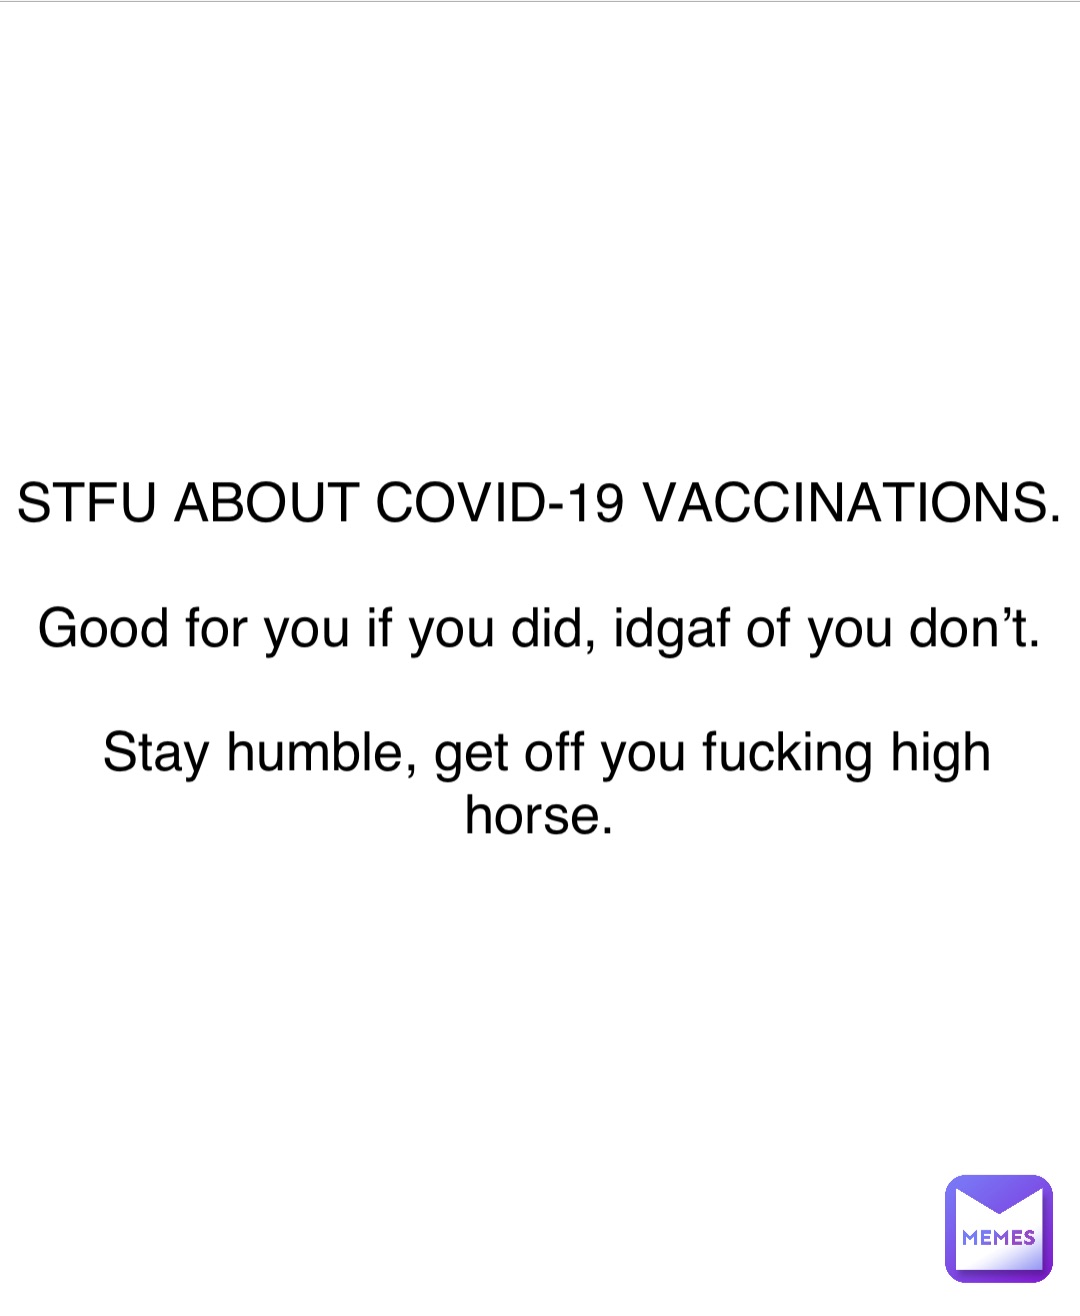 STFU ABOUT COVID-19 VACCINATIONS.

Good for you if you did, idgaf of you don’t.

Stay humble, get off you fucking high horse.